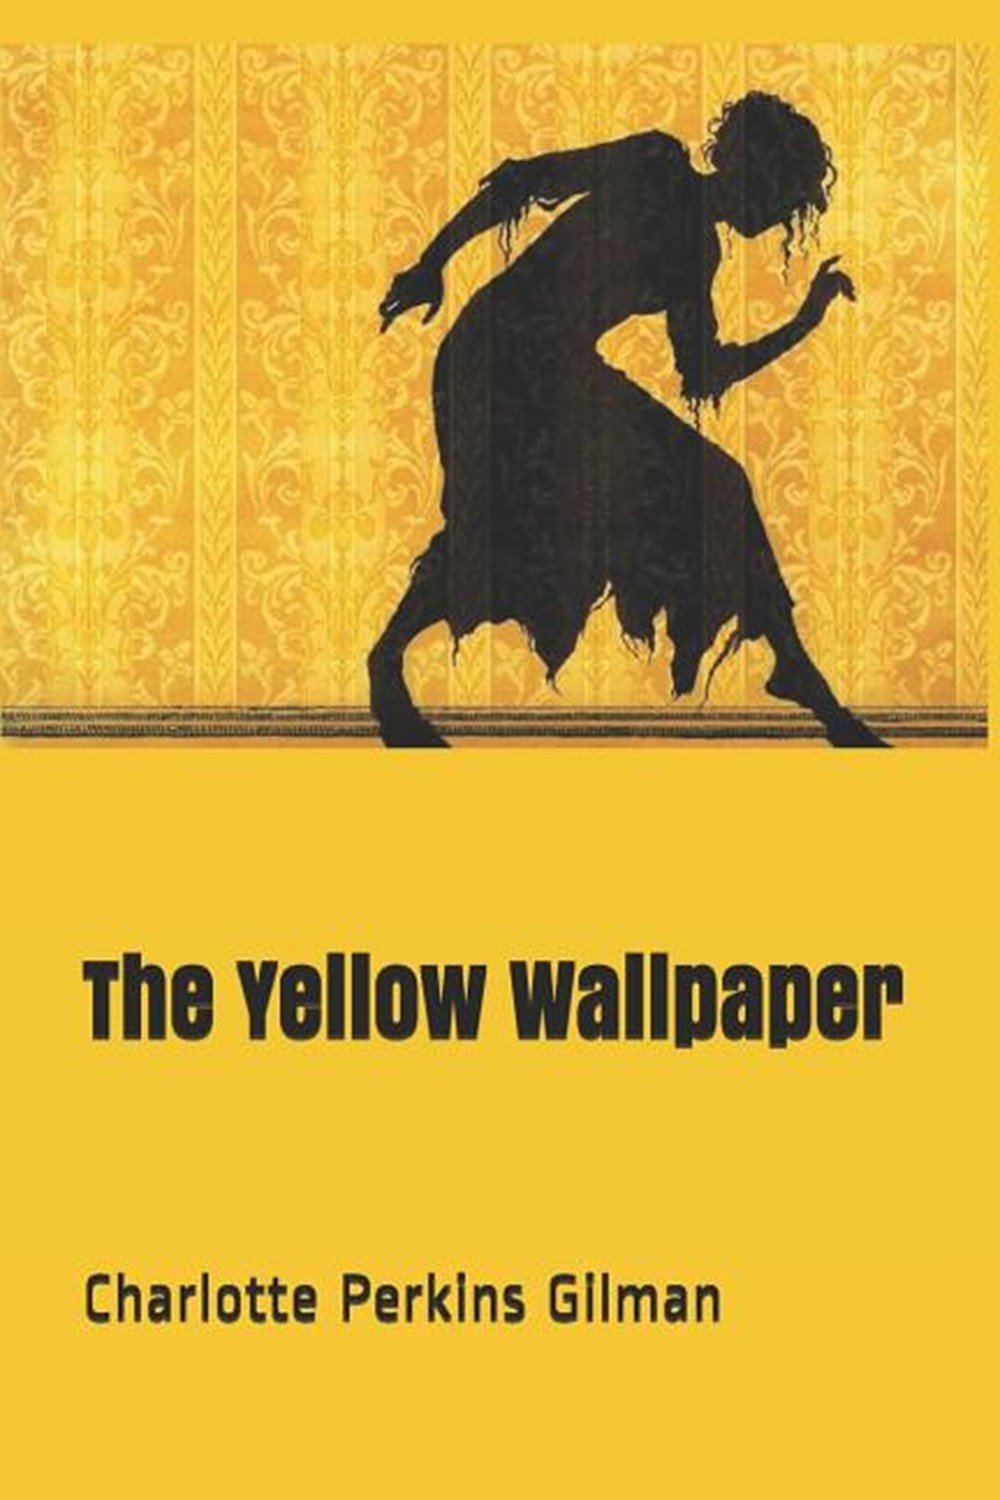 Background The Yellow Wallpaper